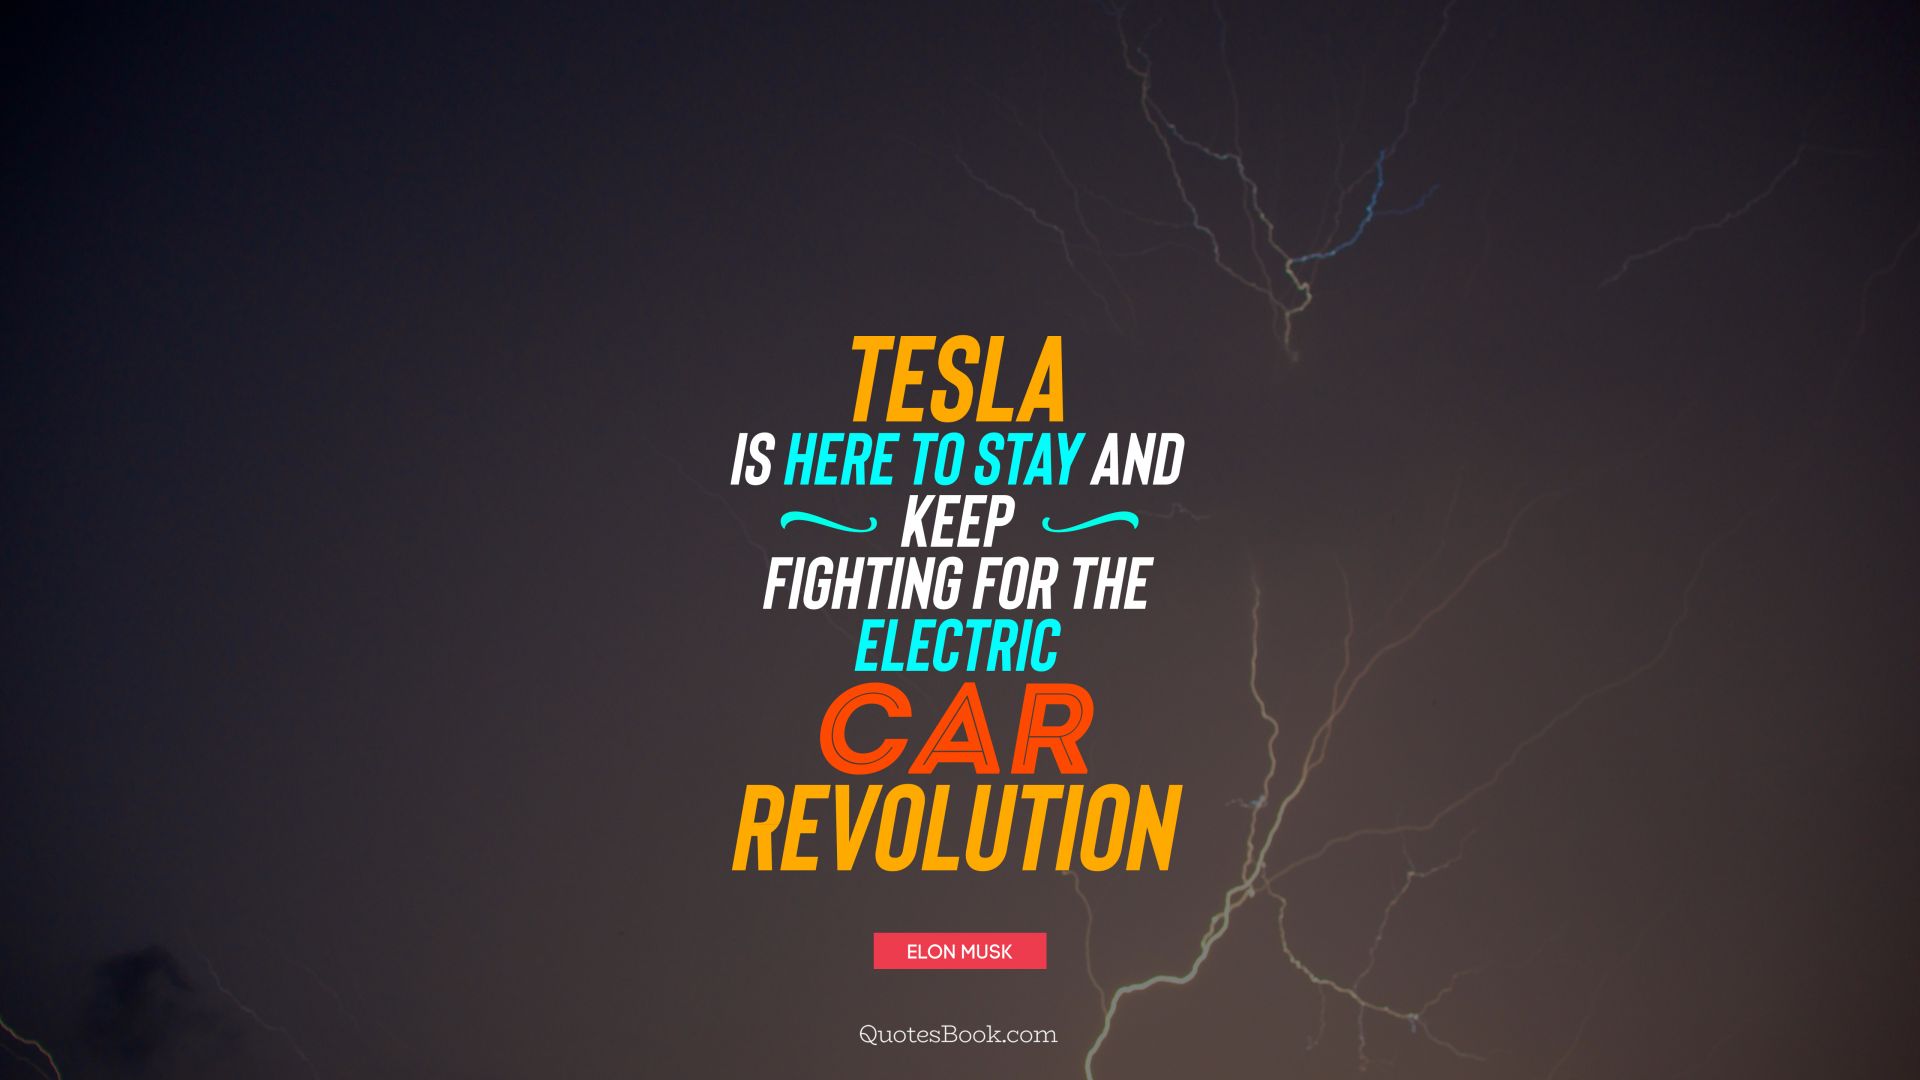 Tesla is here to stay and keep fighting for the electric car revolution. - Quote by Elon Musk